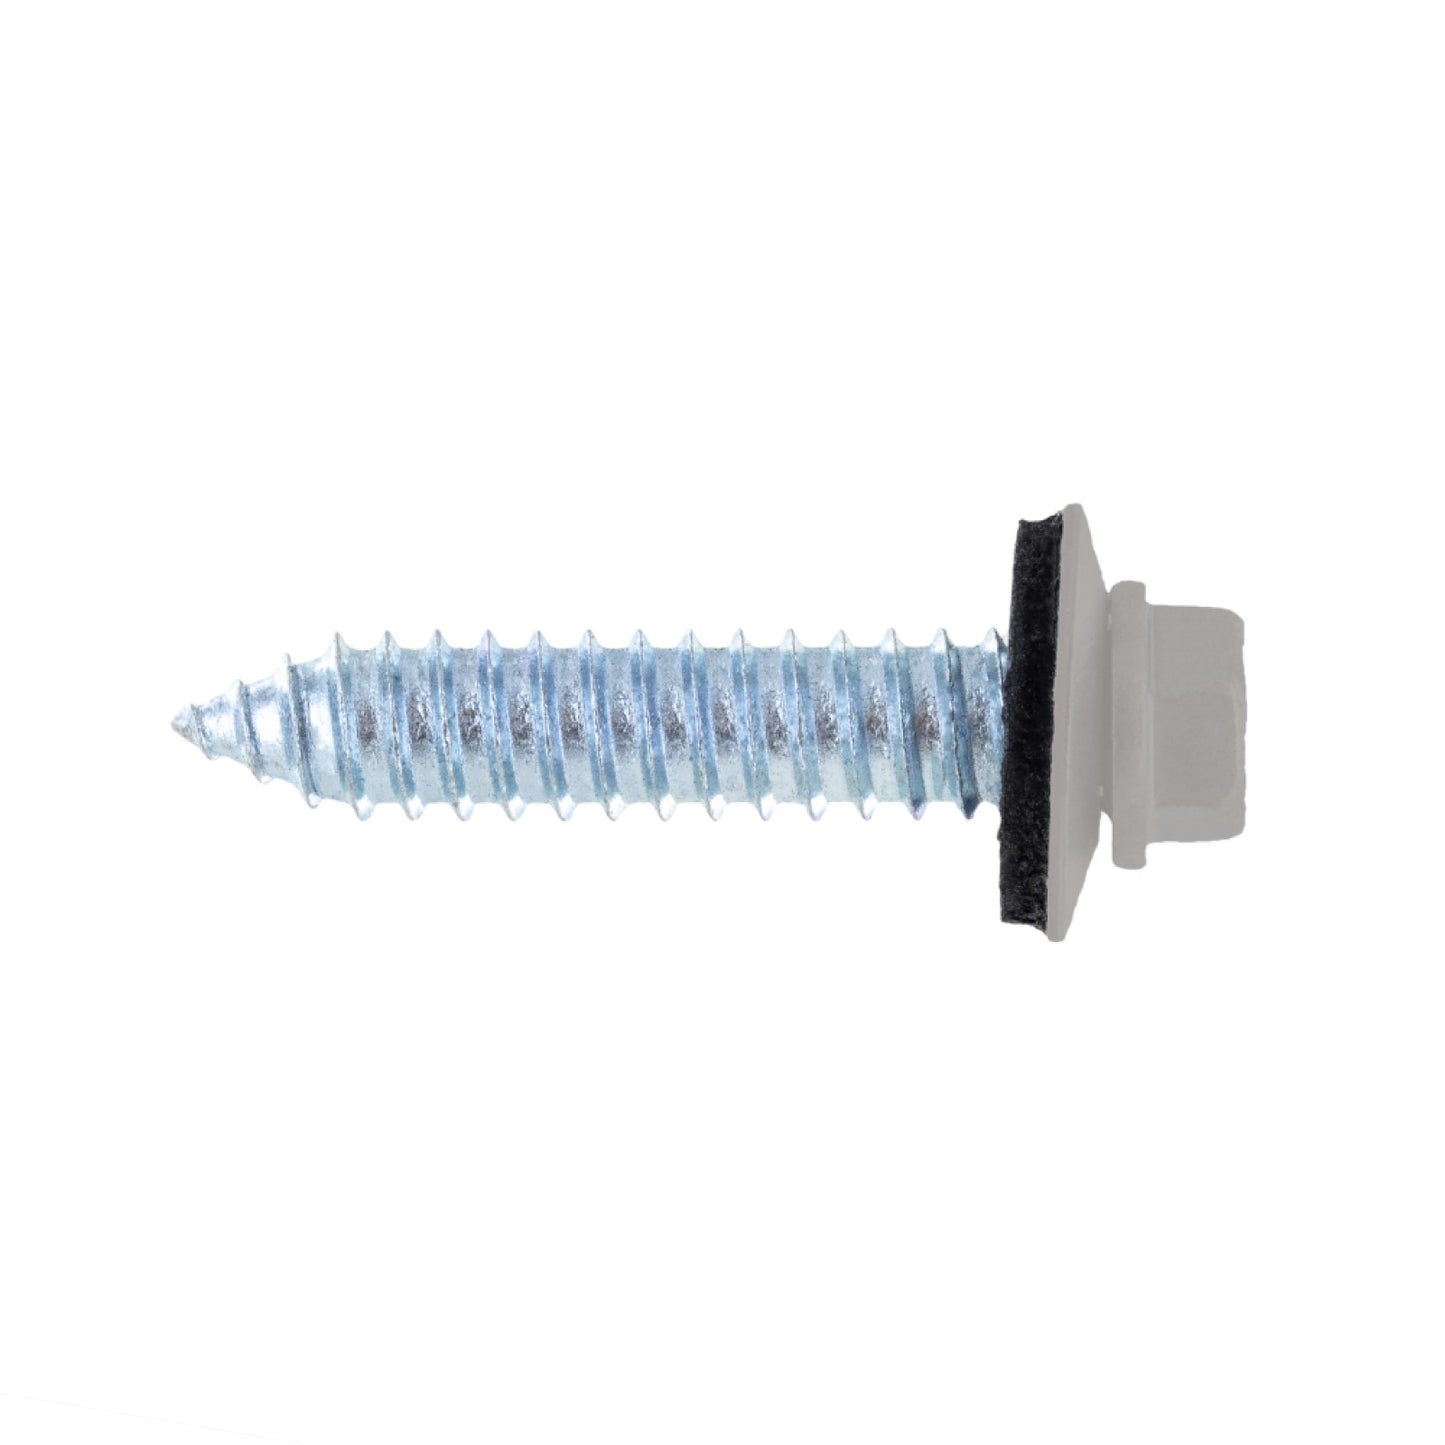 #17 x 1-1/4" Tapping Steelbinder Metal Roofing Screw - Ash Gray - Pkg 250